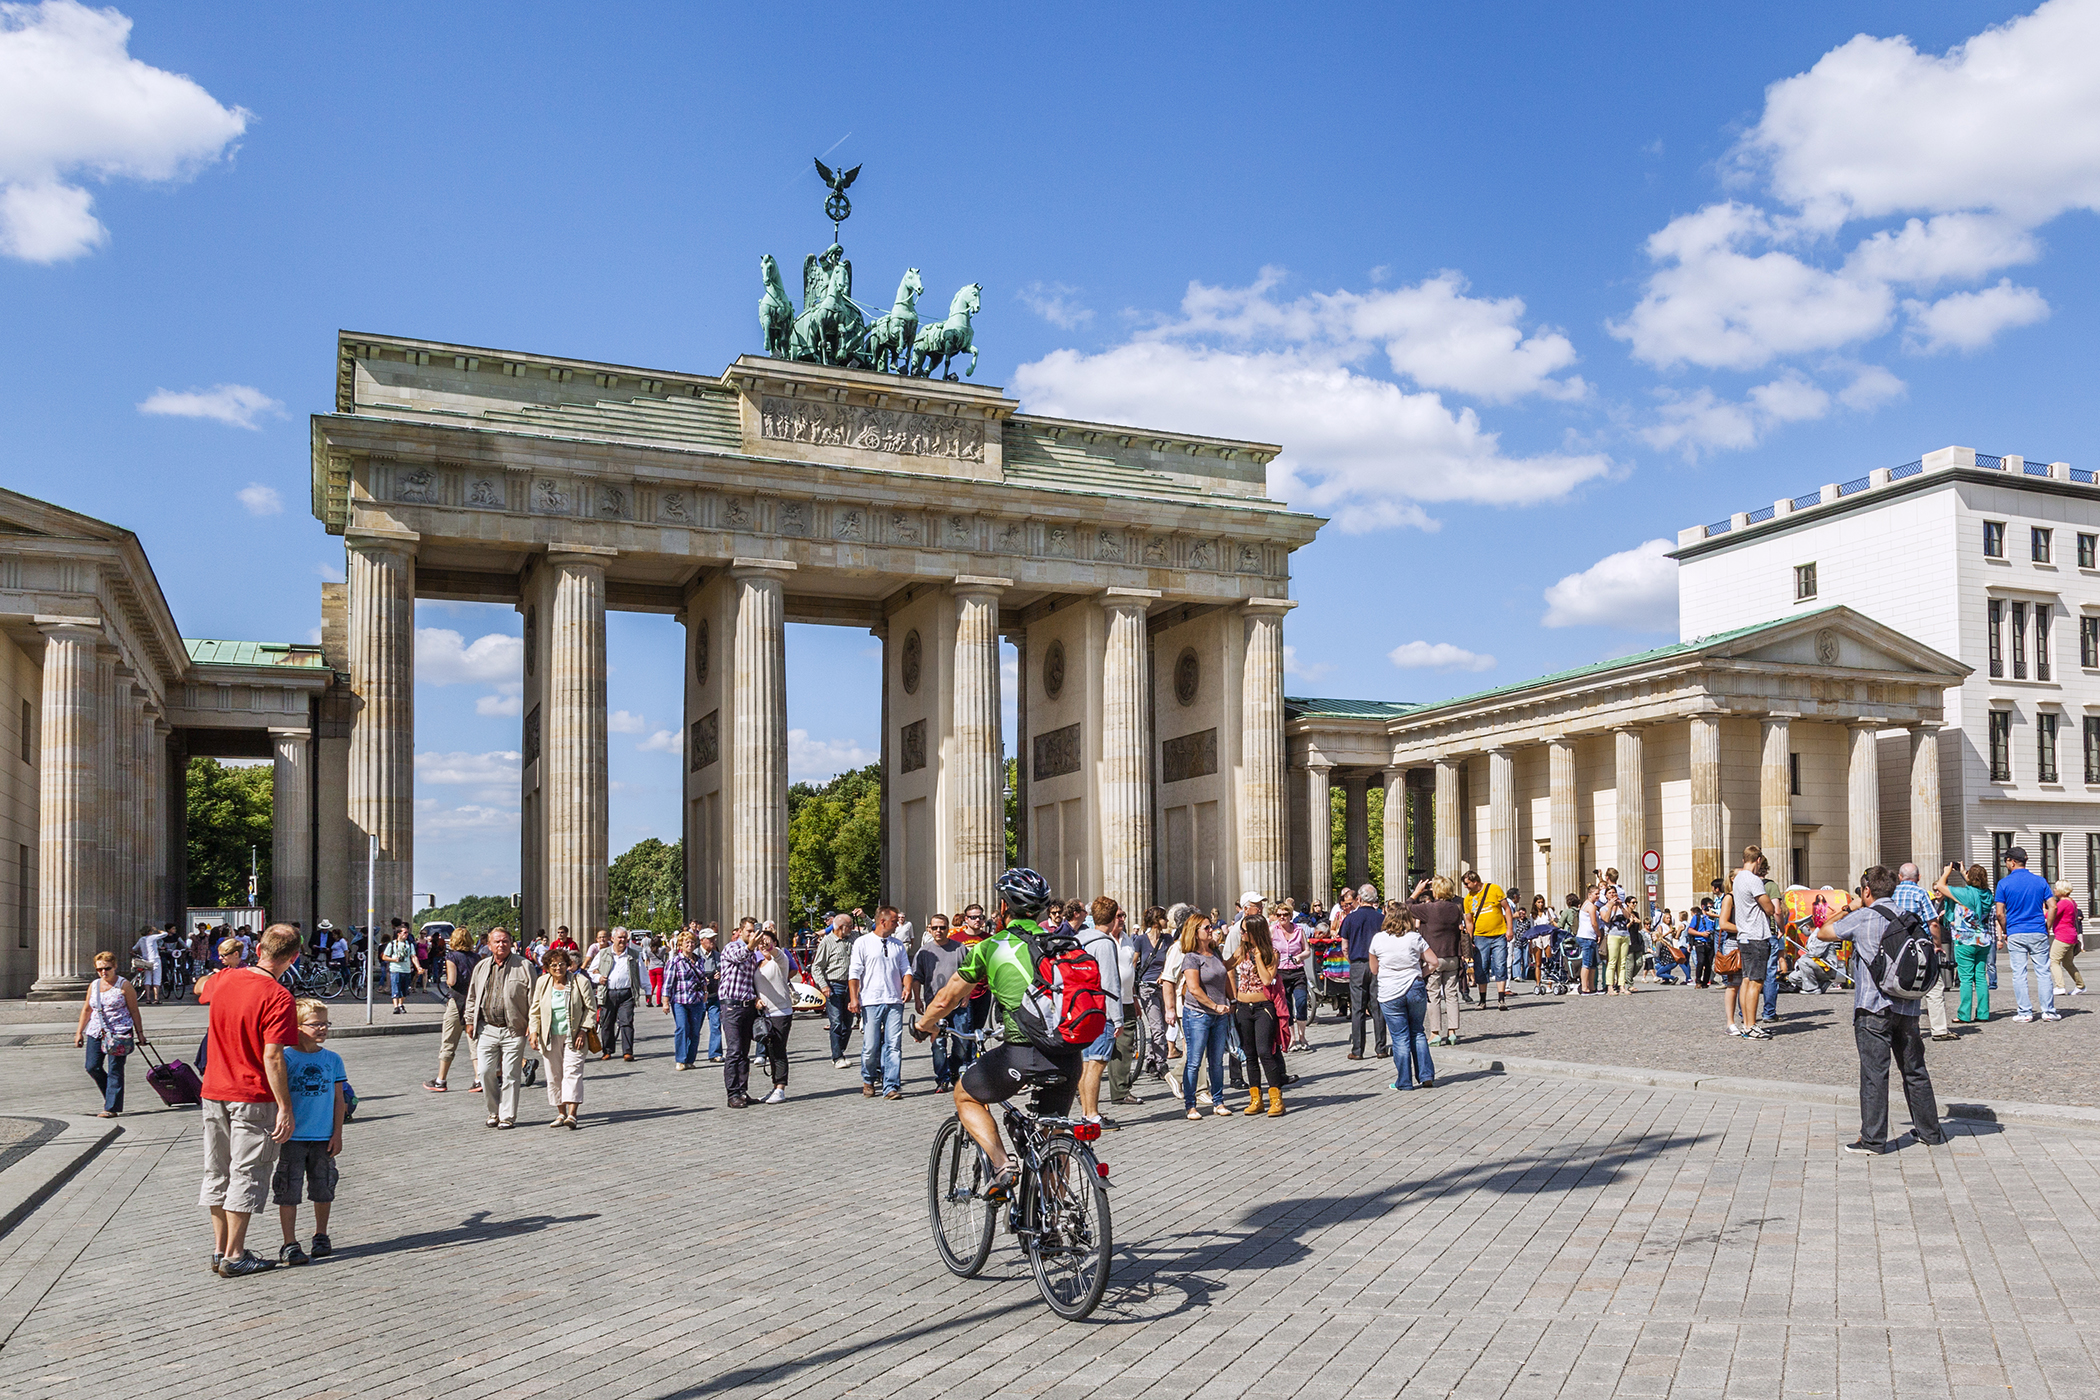 International Colleges: Should You Go To College in Germany? | Money